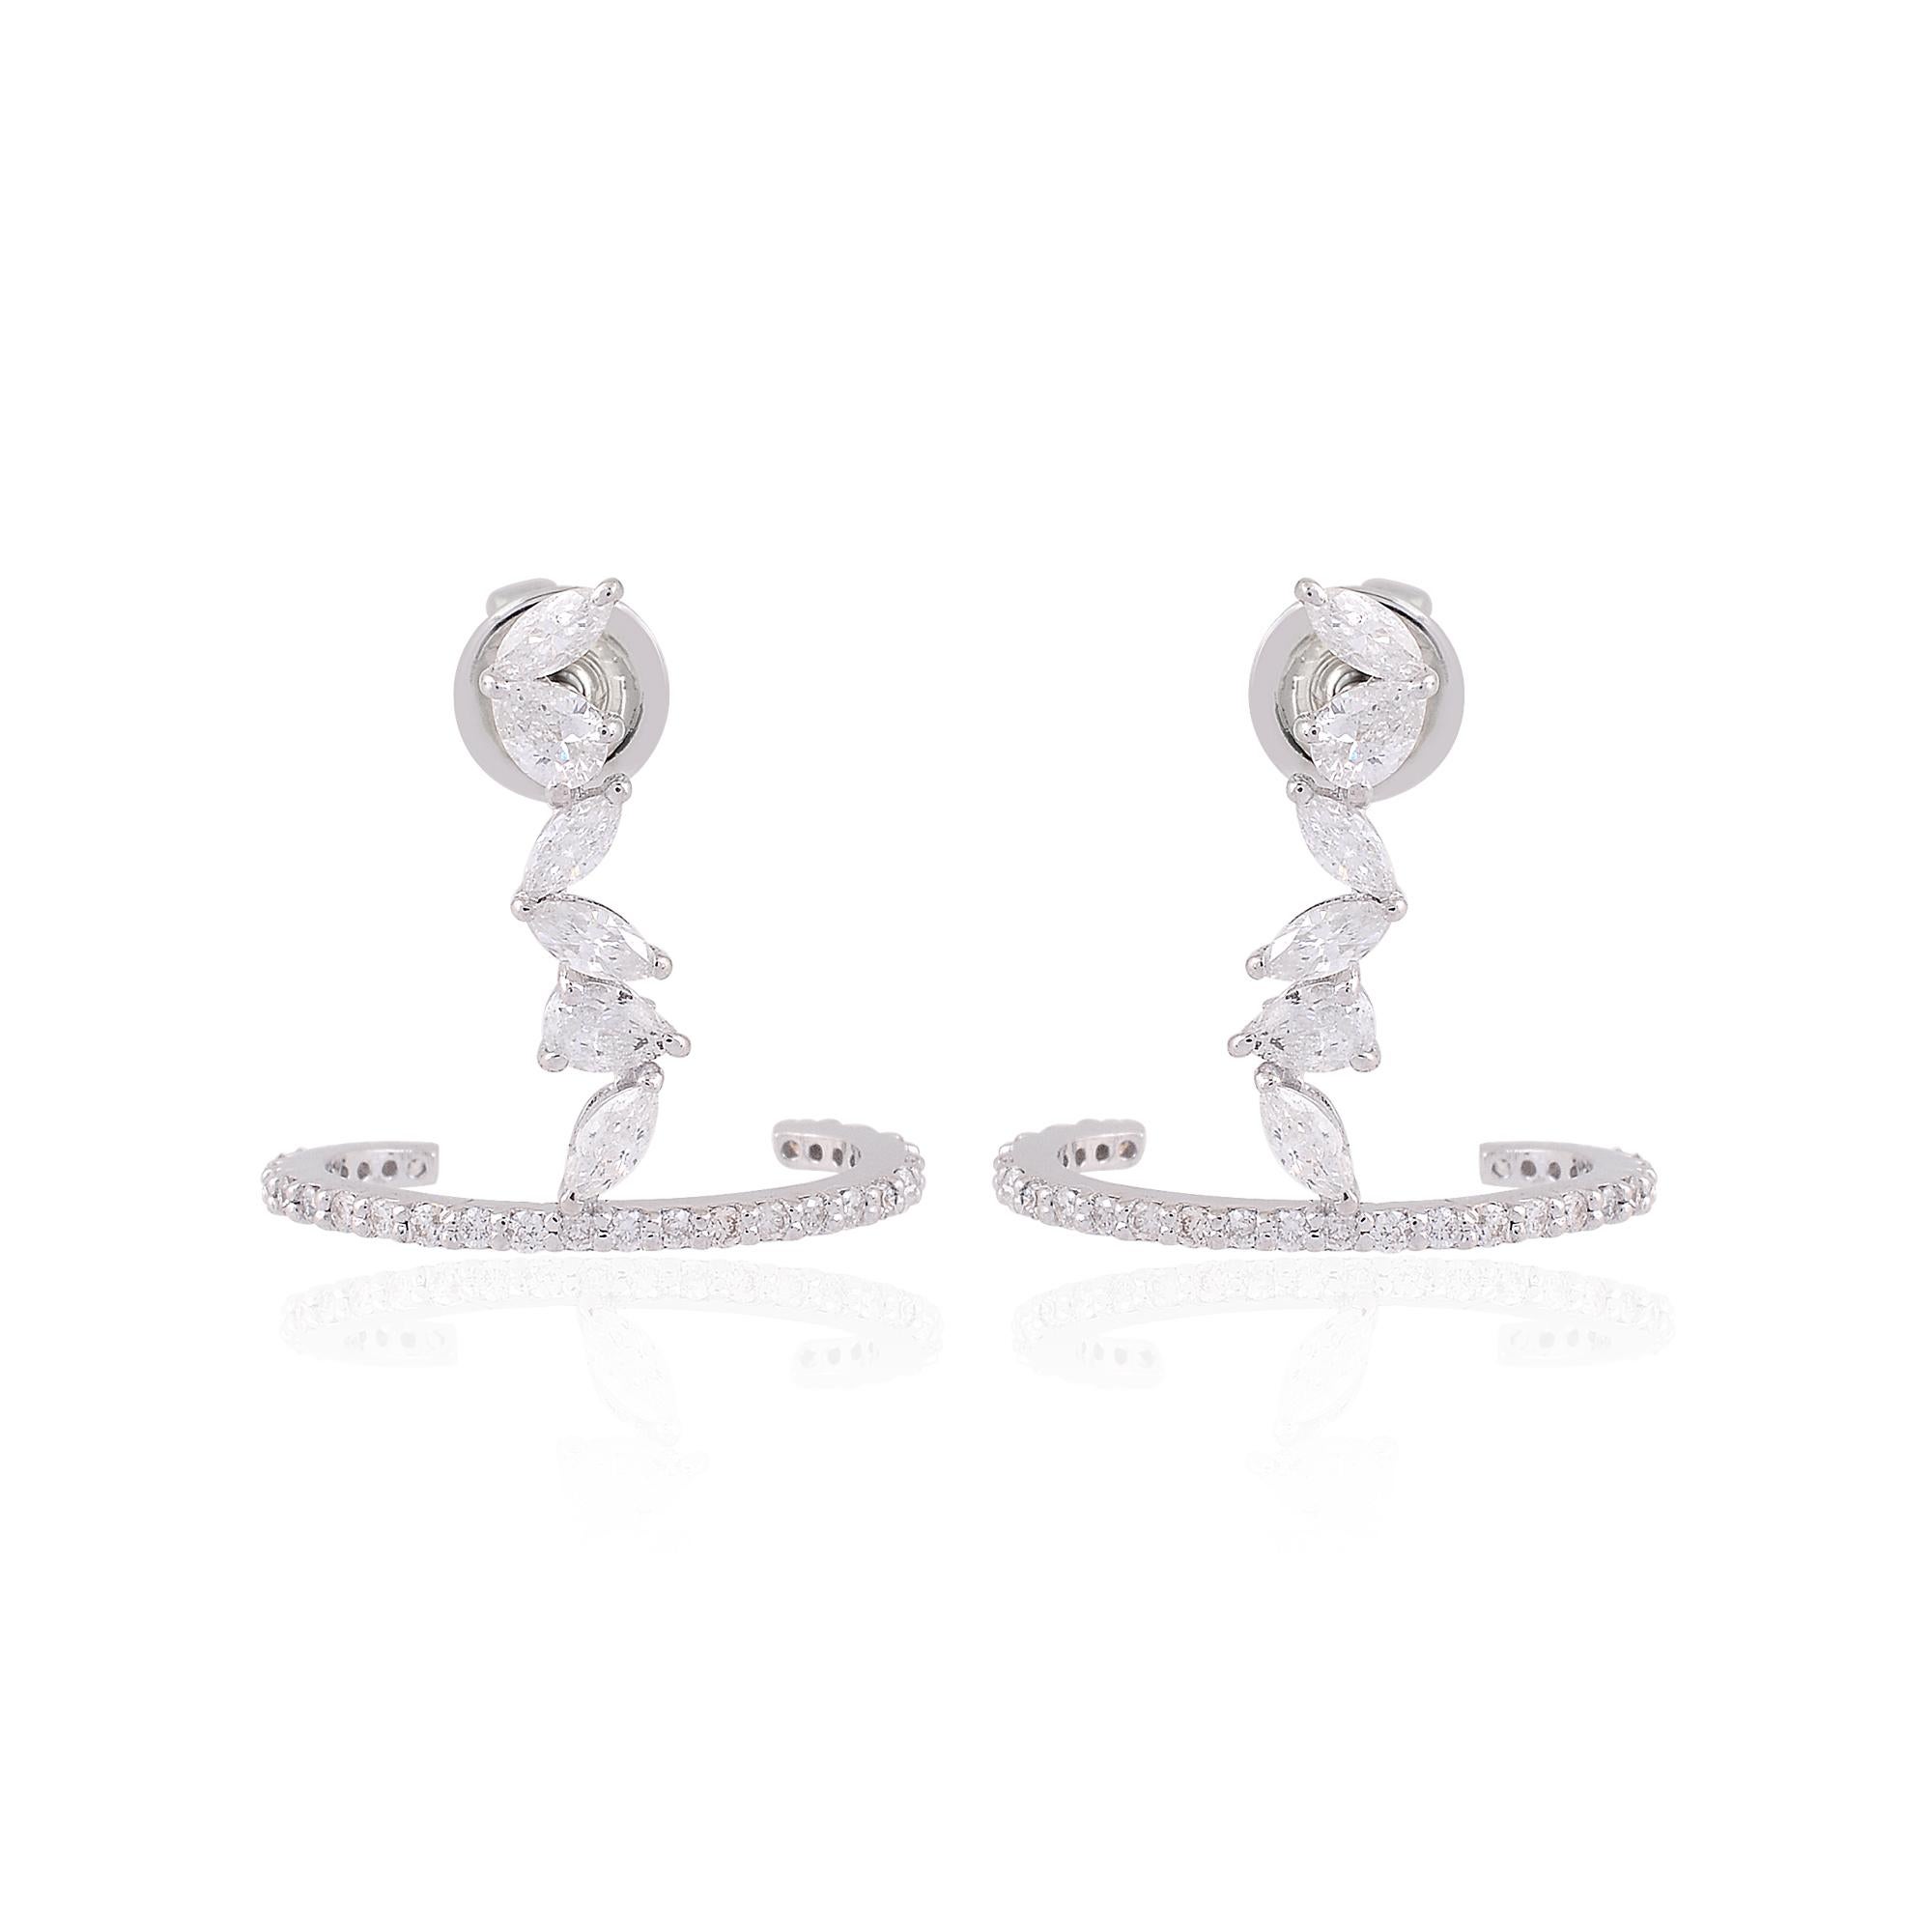 Item Code :- SEE-1127K
Gross Weight :- 2.94 gm
18k White Gold Weight :- 2.80 gm
Diamond Weight :- 0.70 Carat  ( AVERAGE DIAMOND CLARITY SI1-SI2 & COLOR H-I )
Earrings Size :- 13x16 mm approx.
✦ Sizing
.....................
We can adjust most items